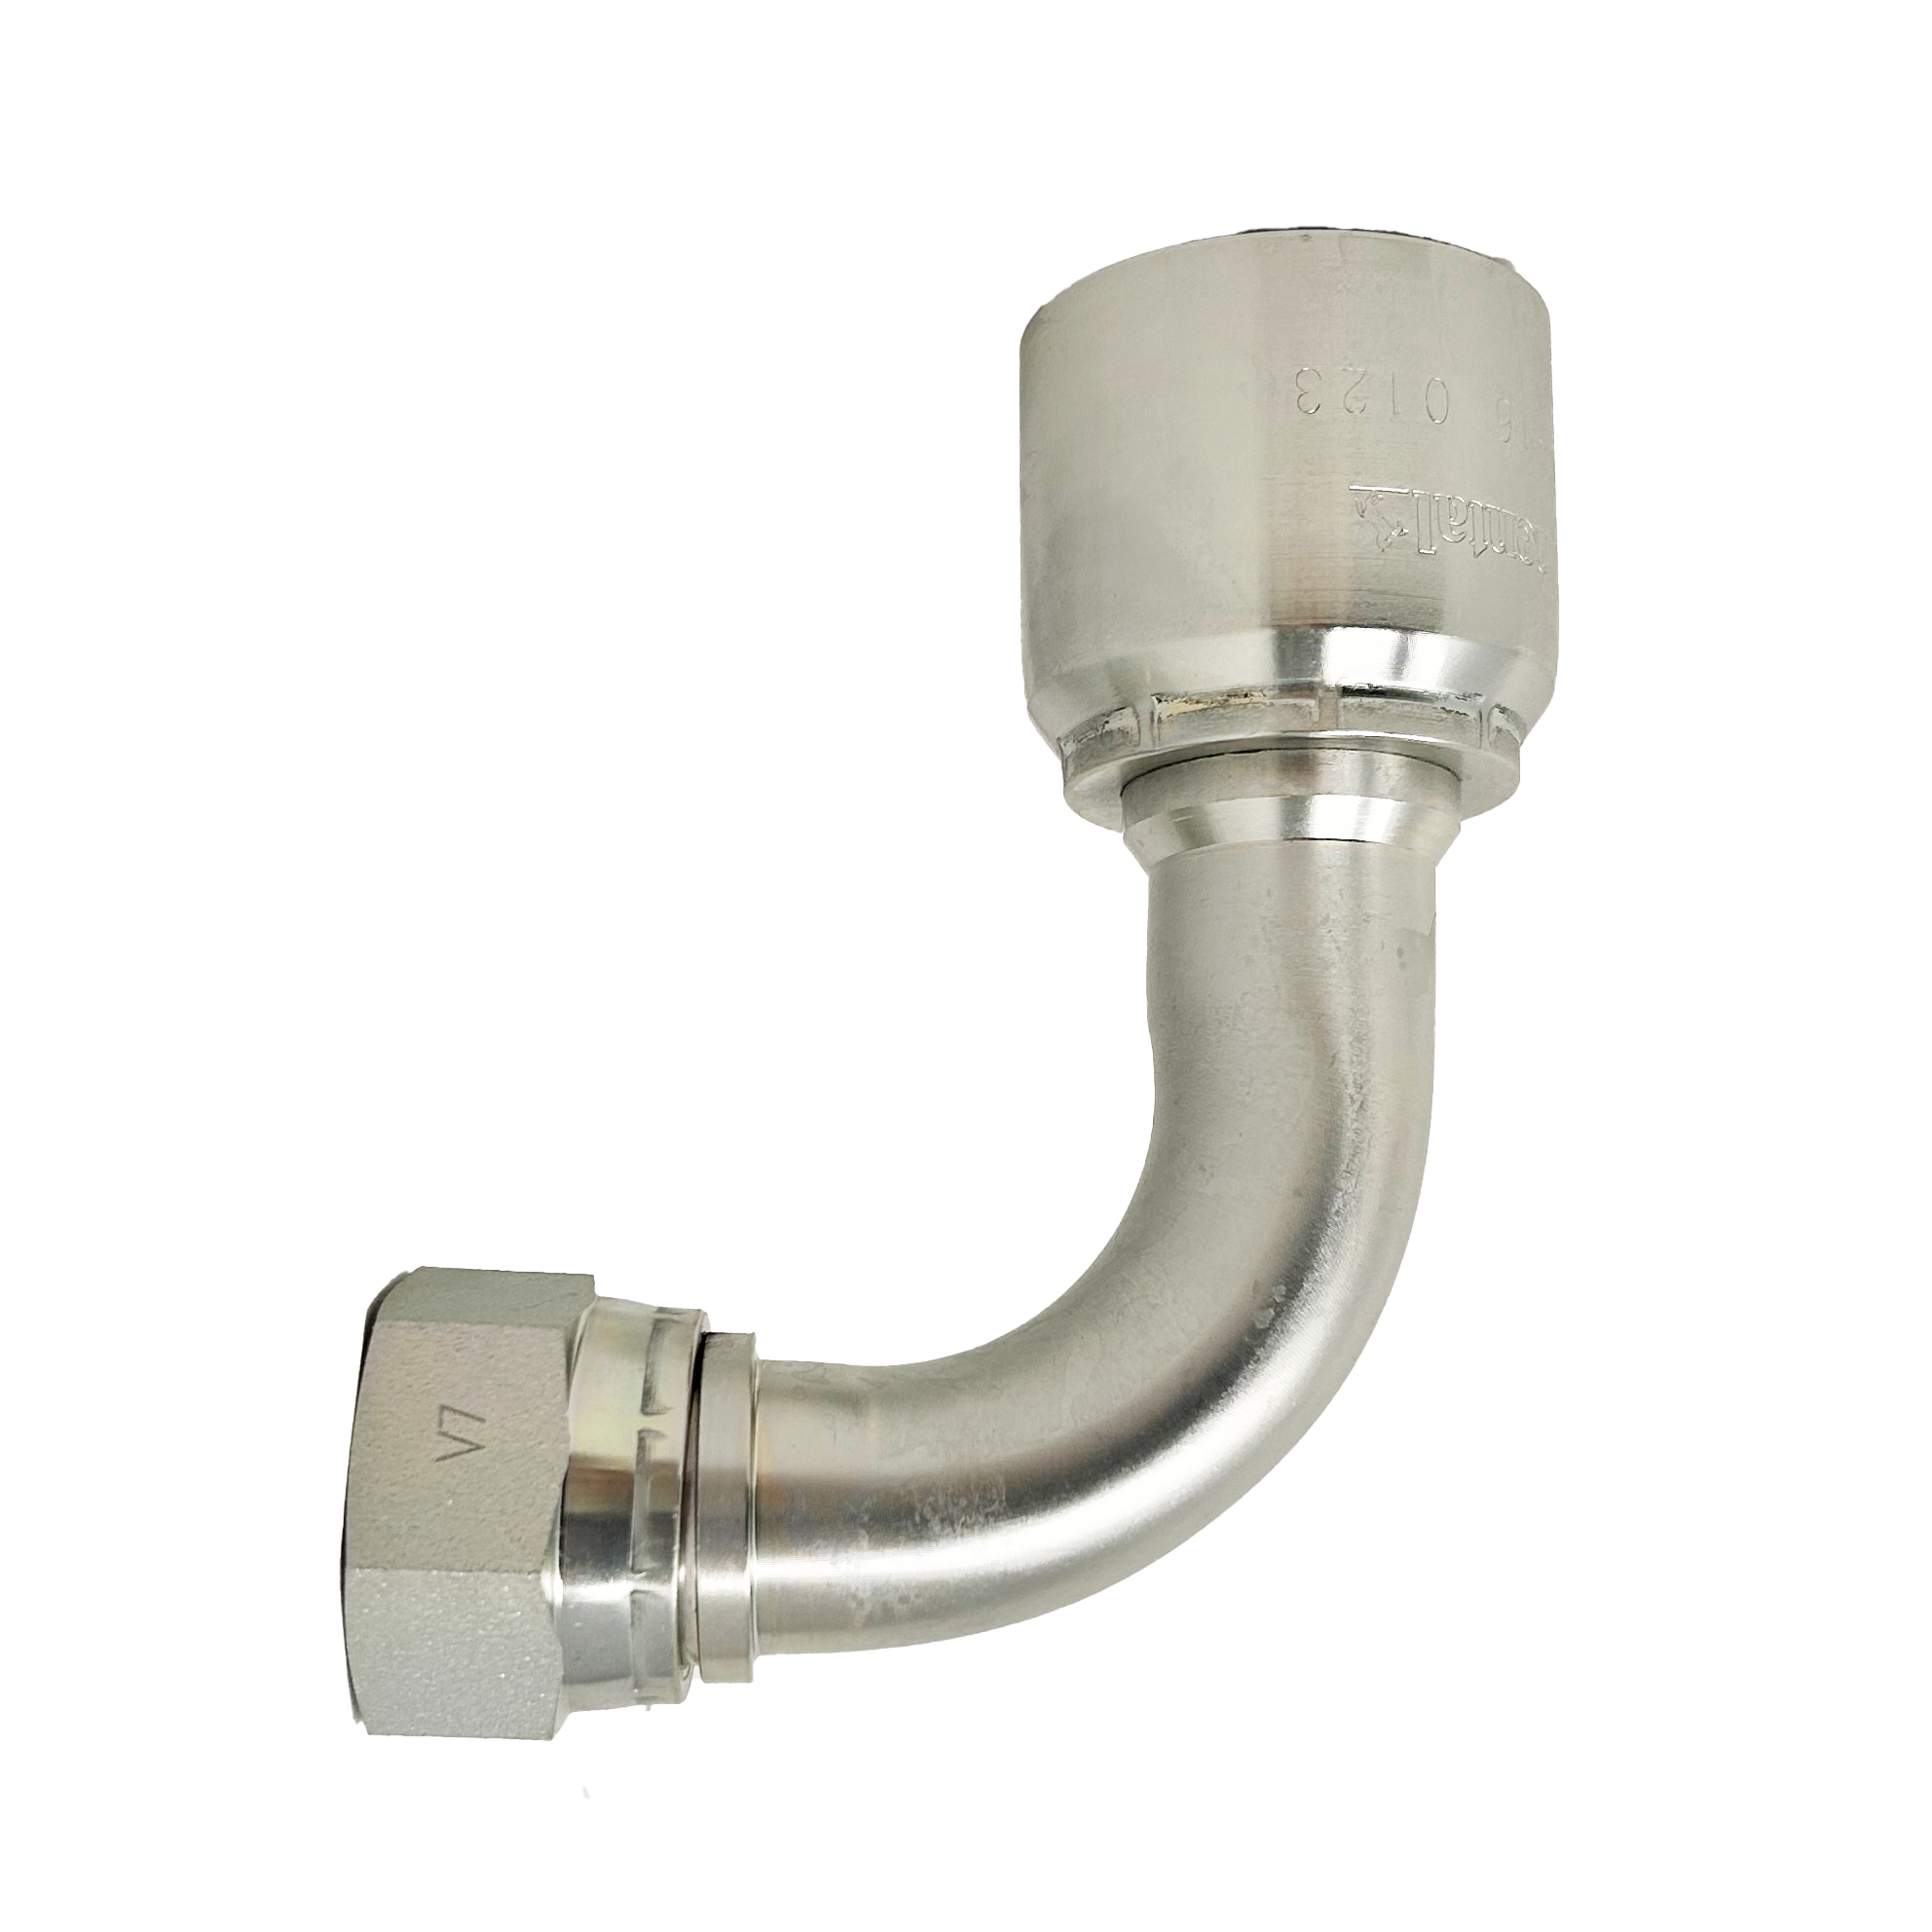 B2-JCFX90-0810: Continental Hose Fitting, 0.5 (1/2") Hose ID x 7/8-14 Female JIC, 90-Degree Swivel Connection